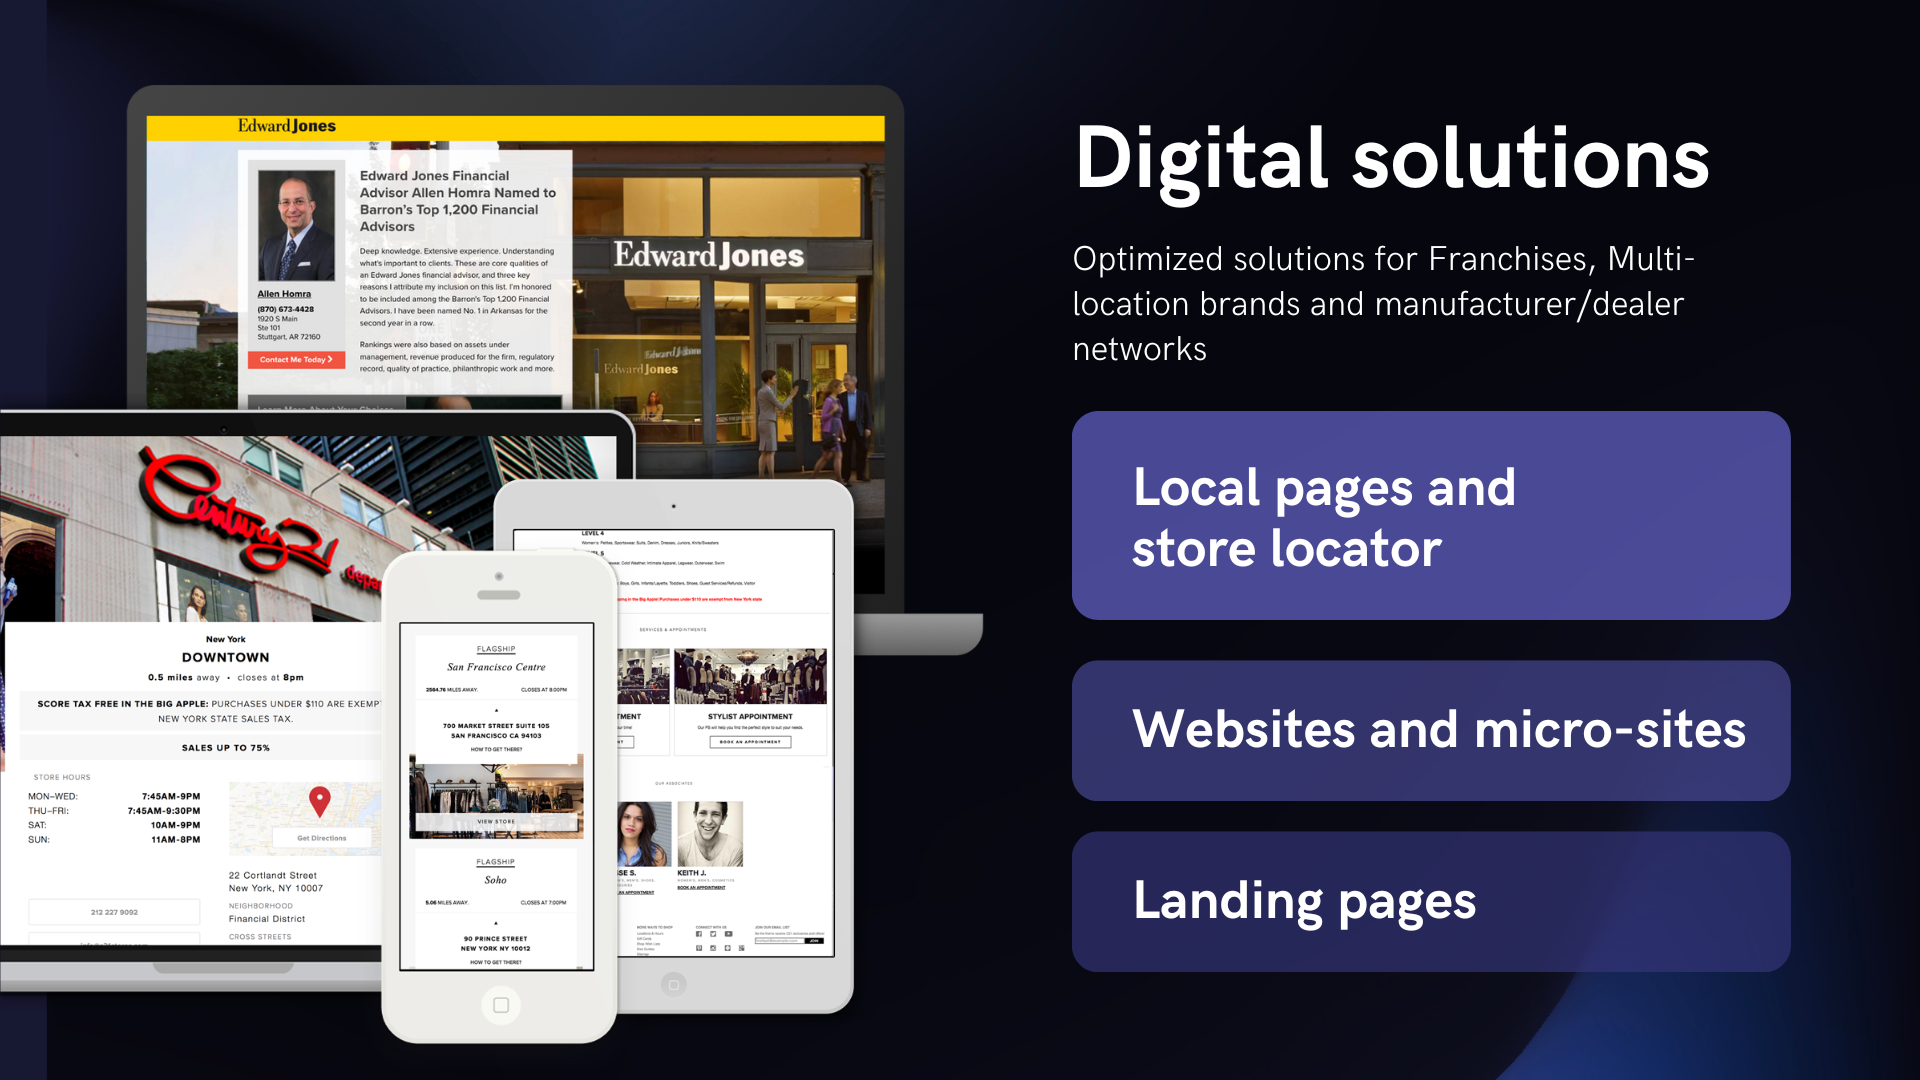 Local pages, store locator, websites and landing pages